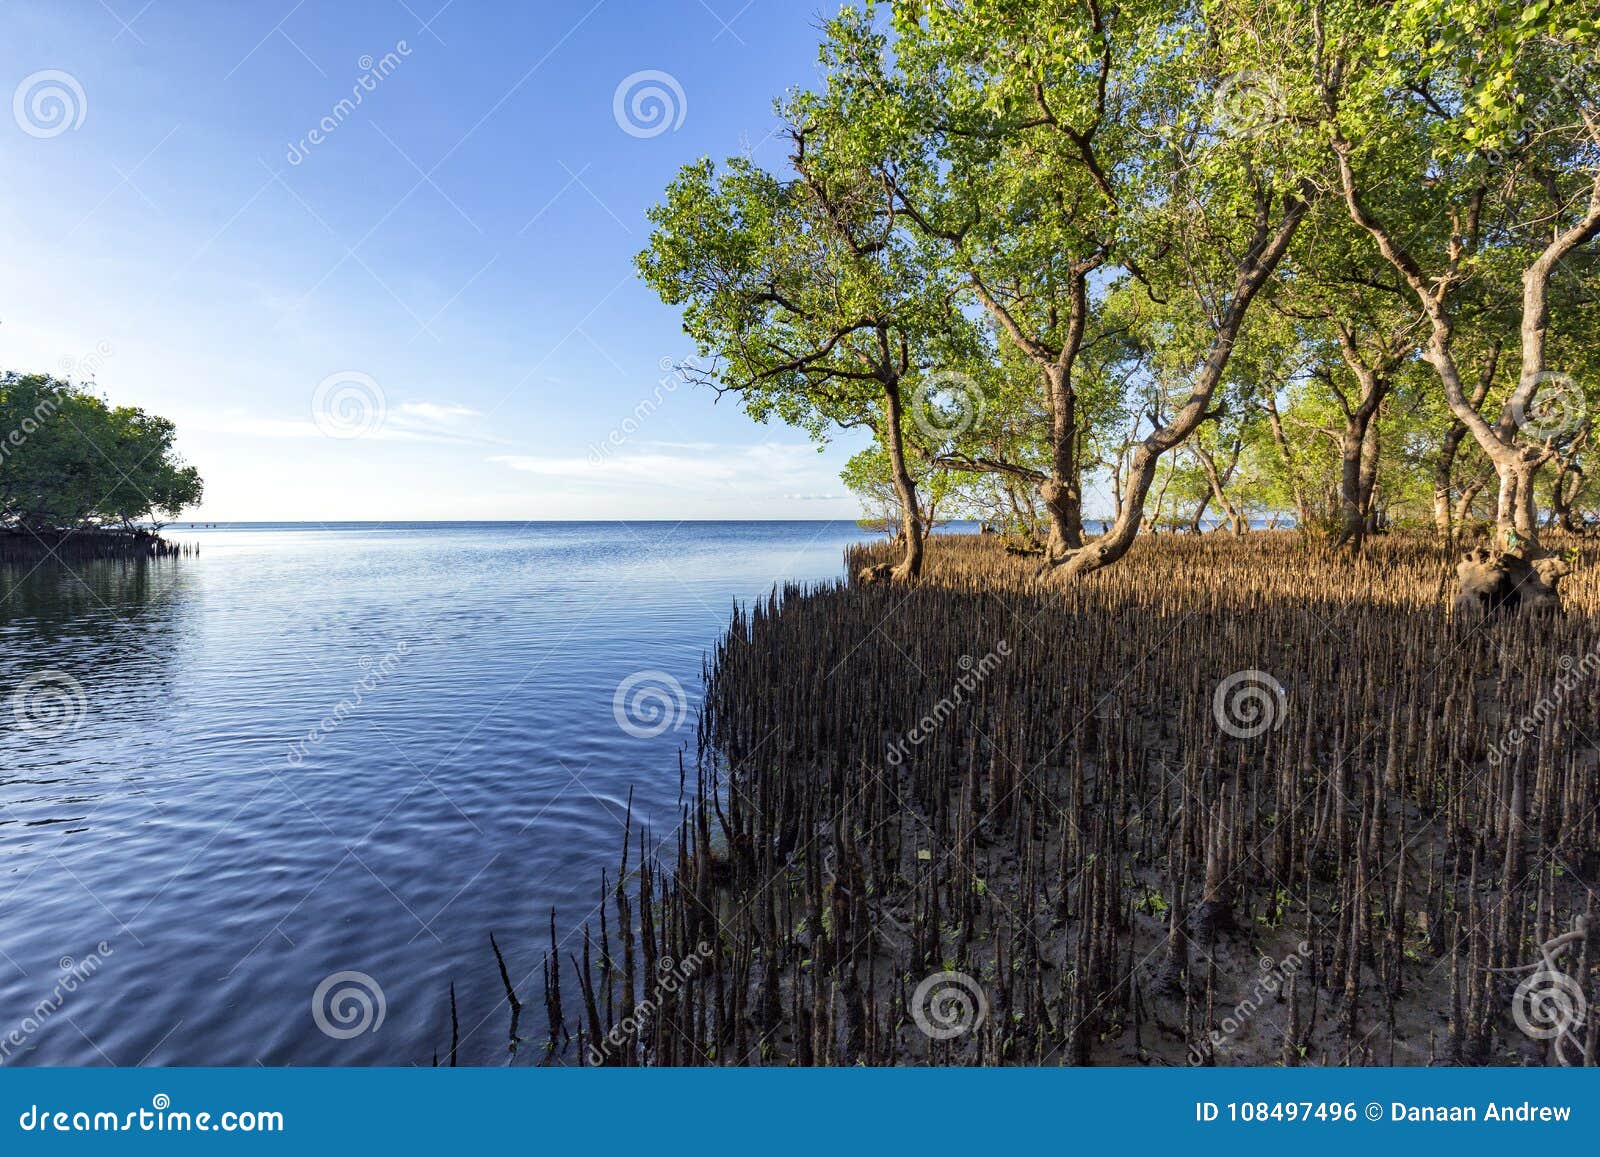 mangrove forests in maumere, flores